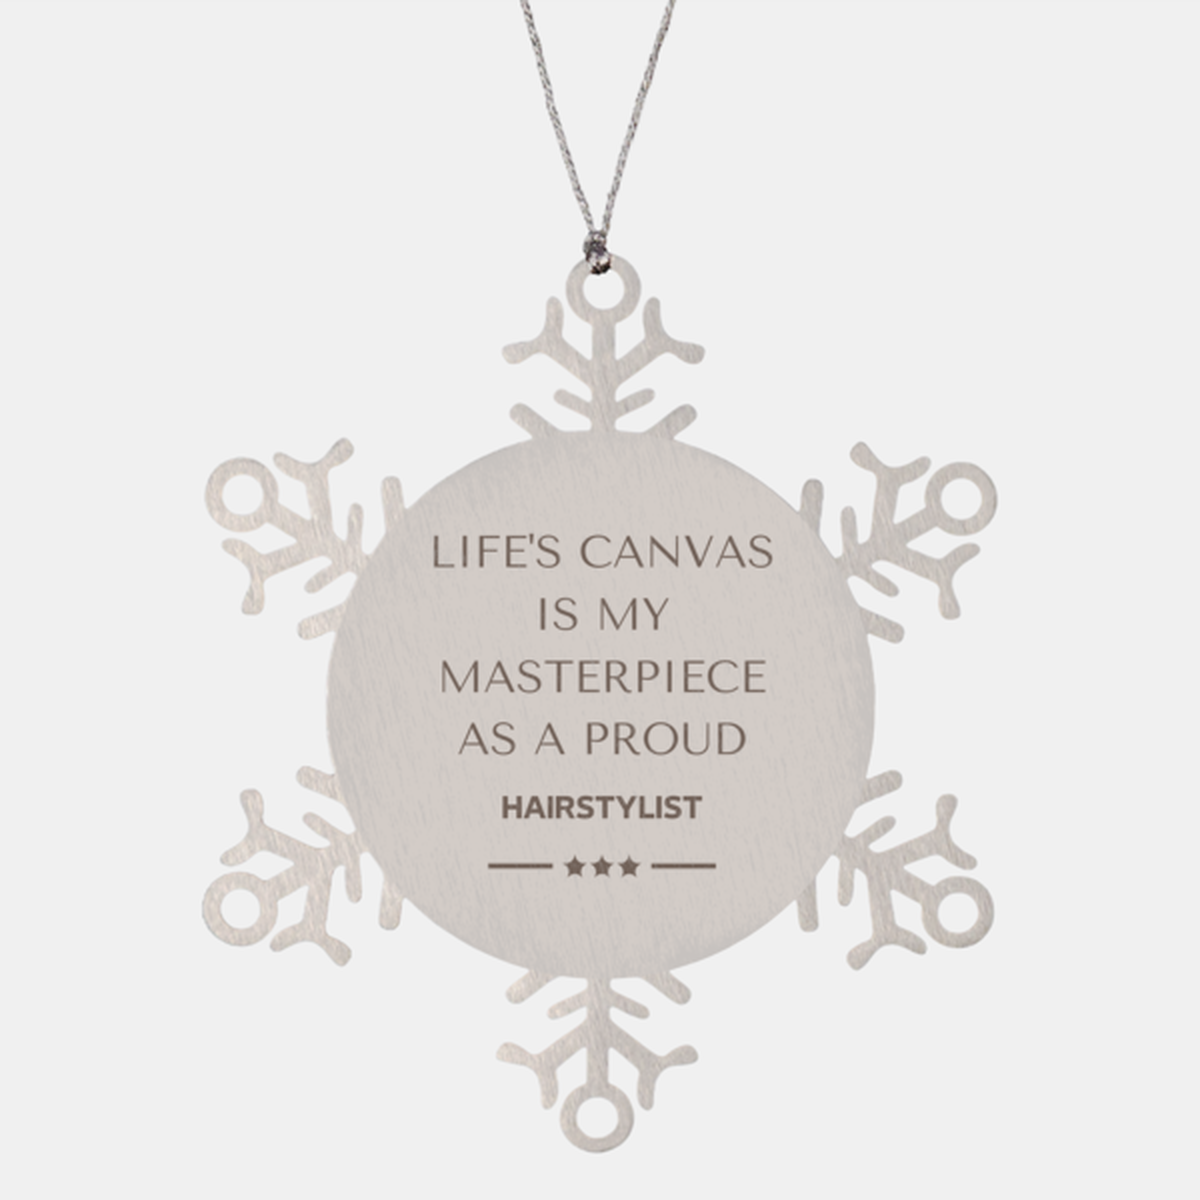 Proud Hairstylist Gifts, Life's canvas is my masterpiece, Epic Birthday Christmas Unique Snowflake Ornament For Hairstylist, Coworkers, Men, Women, Friends